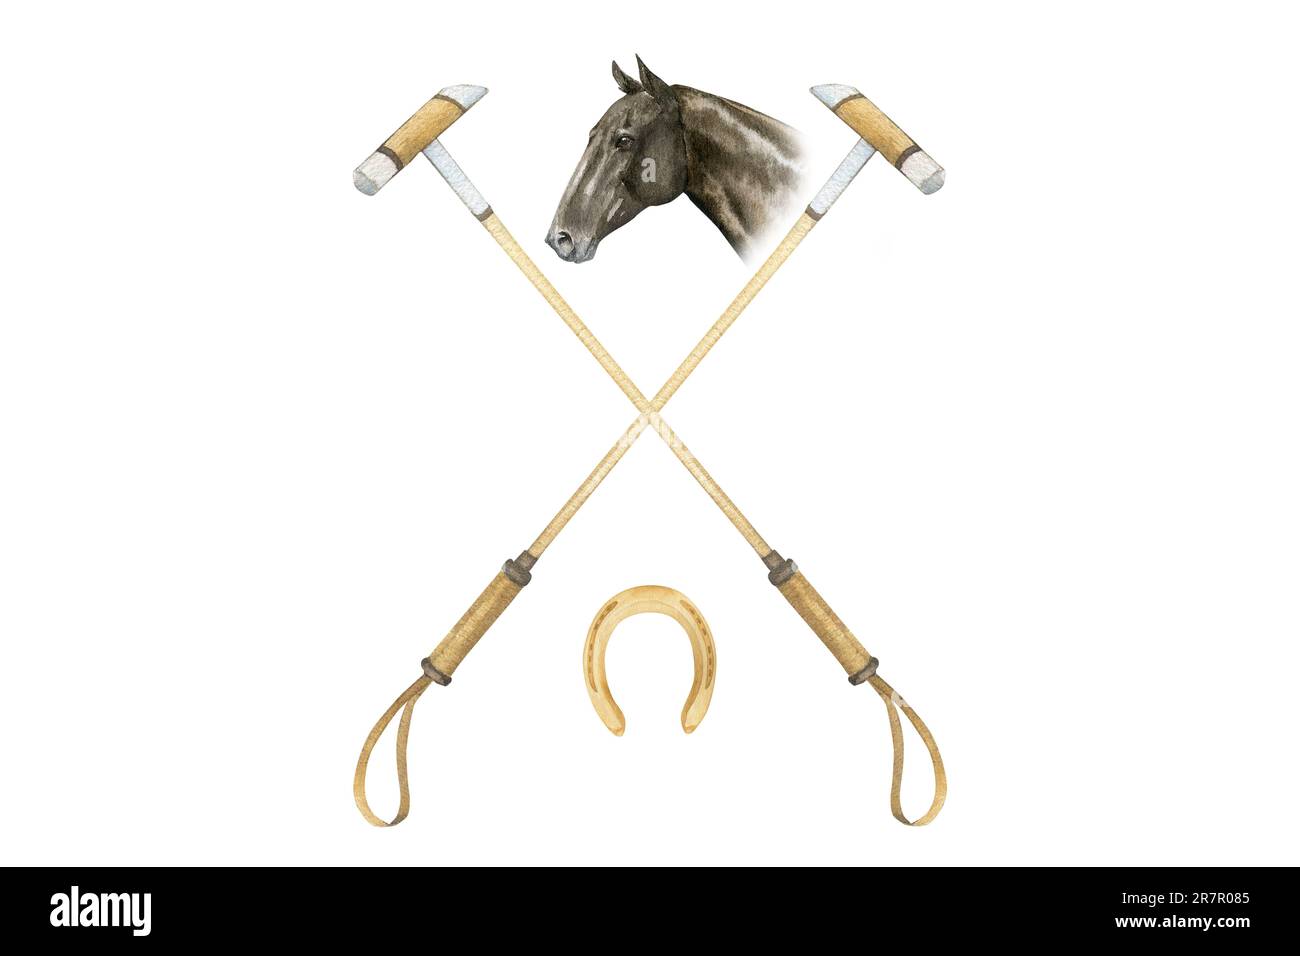 Minimalistic watercolor illustrations of horse portrait, golden horseshoes and horse polo sticks , isolated. Illustration on the theme of horse polo Stock Photo